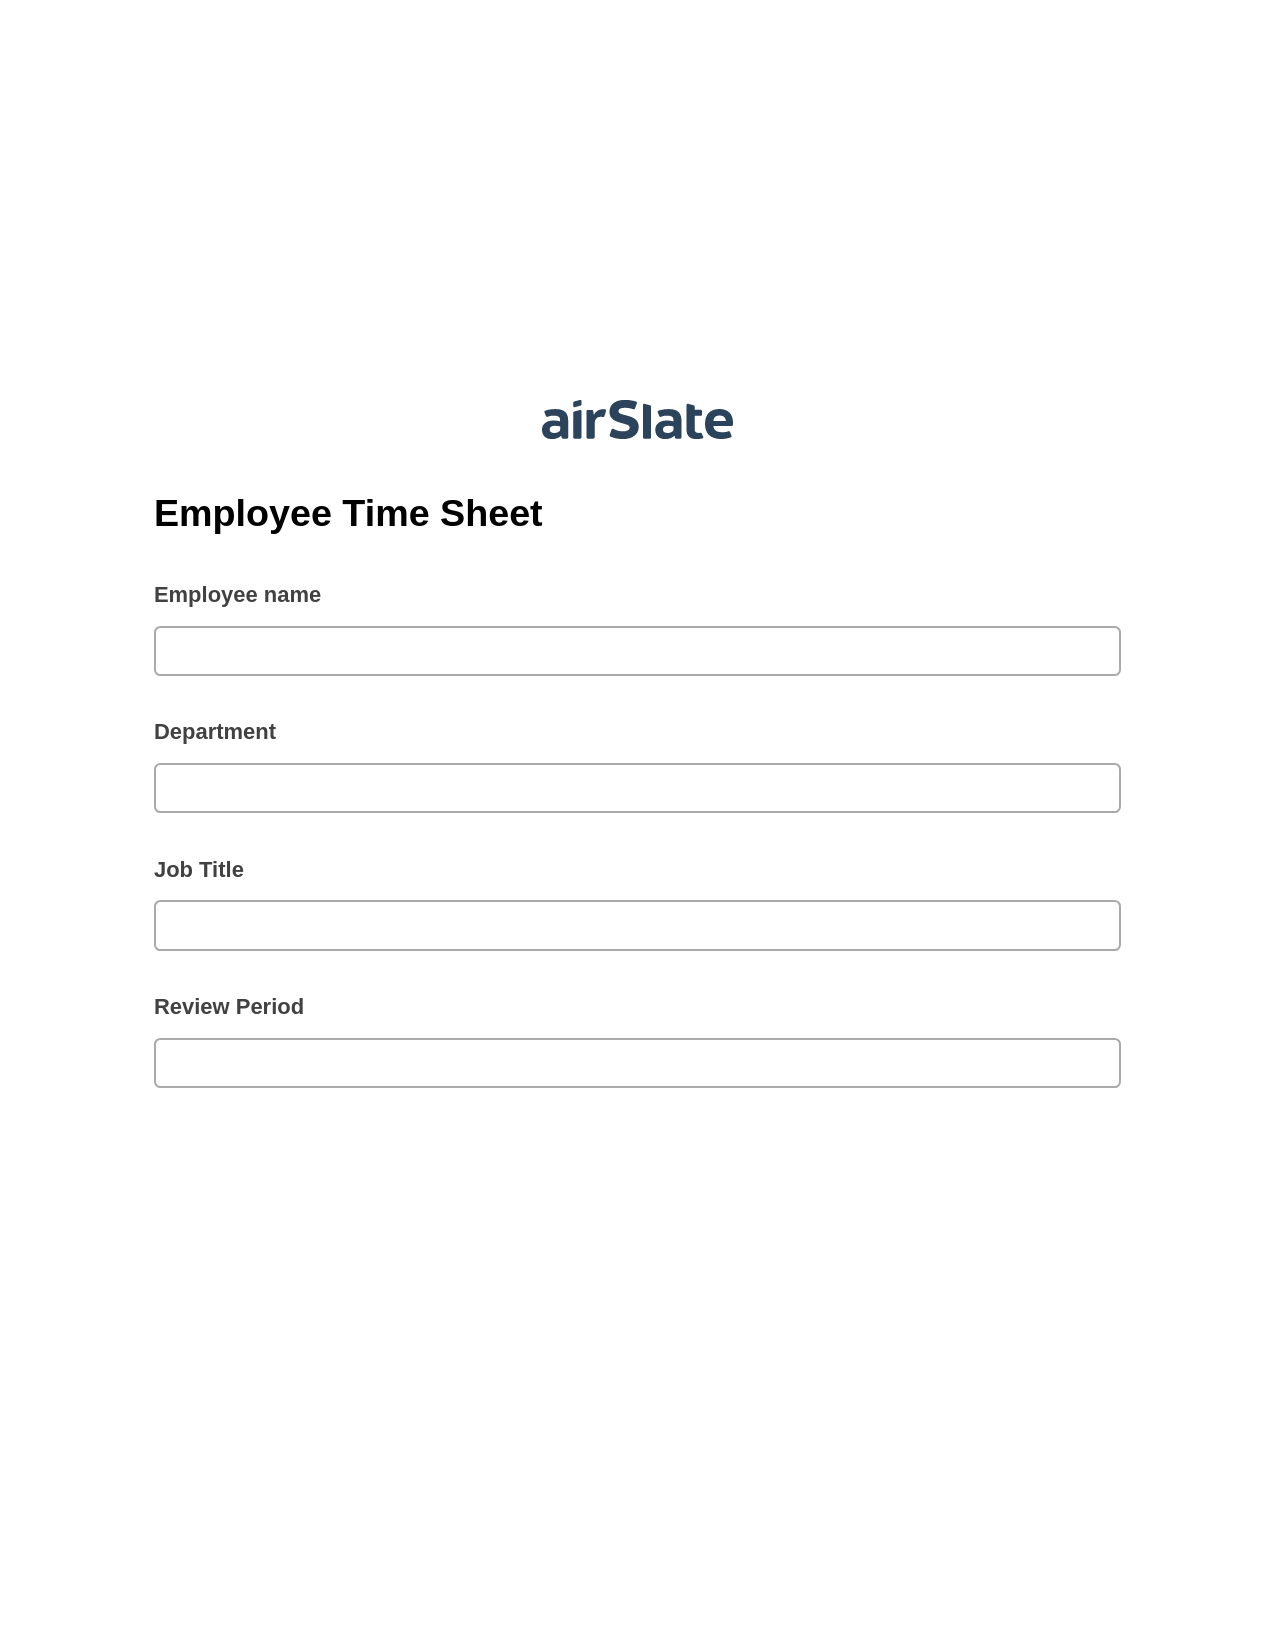 Employee Time Sheet Pre-fill from Office 365 Excel Bot, Update Audit Trail Bot, Export to Excel 365 Bot